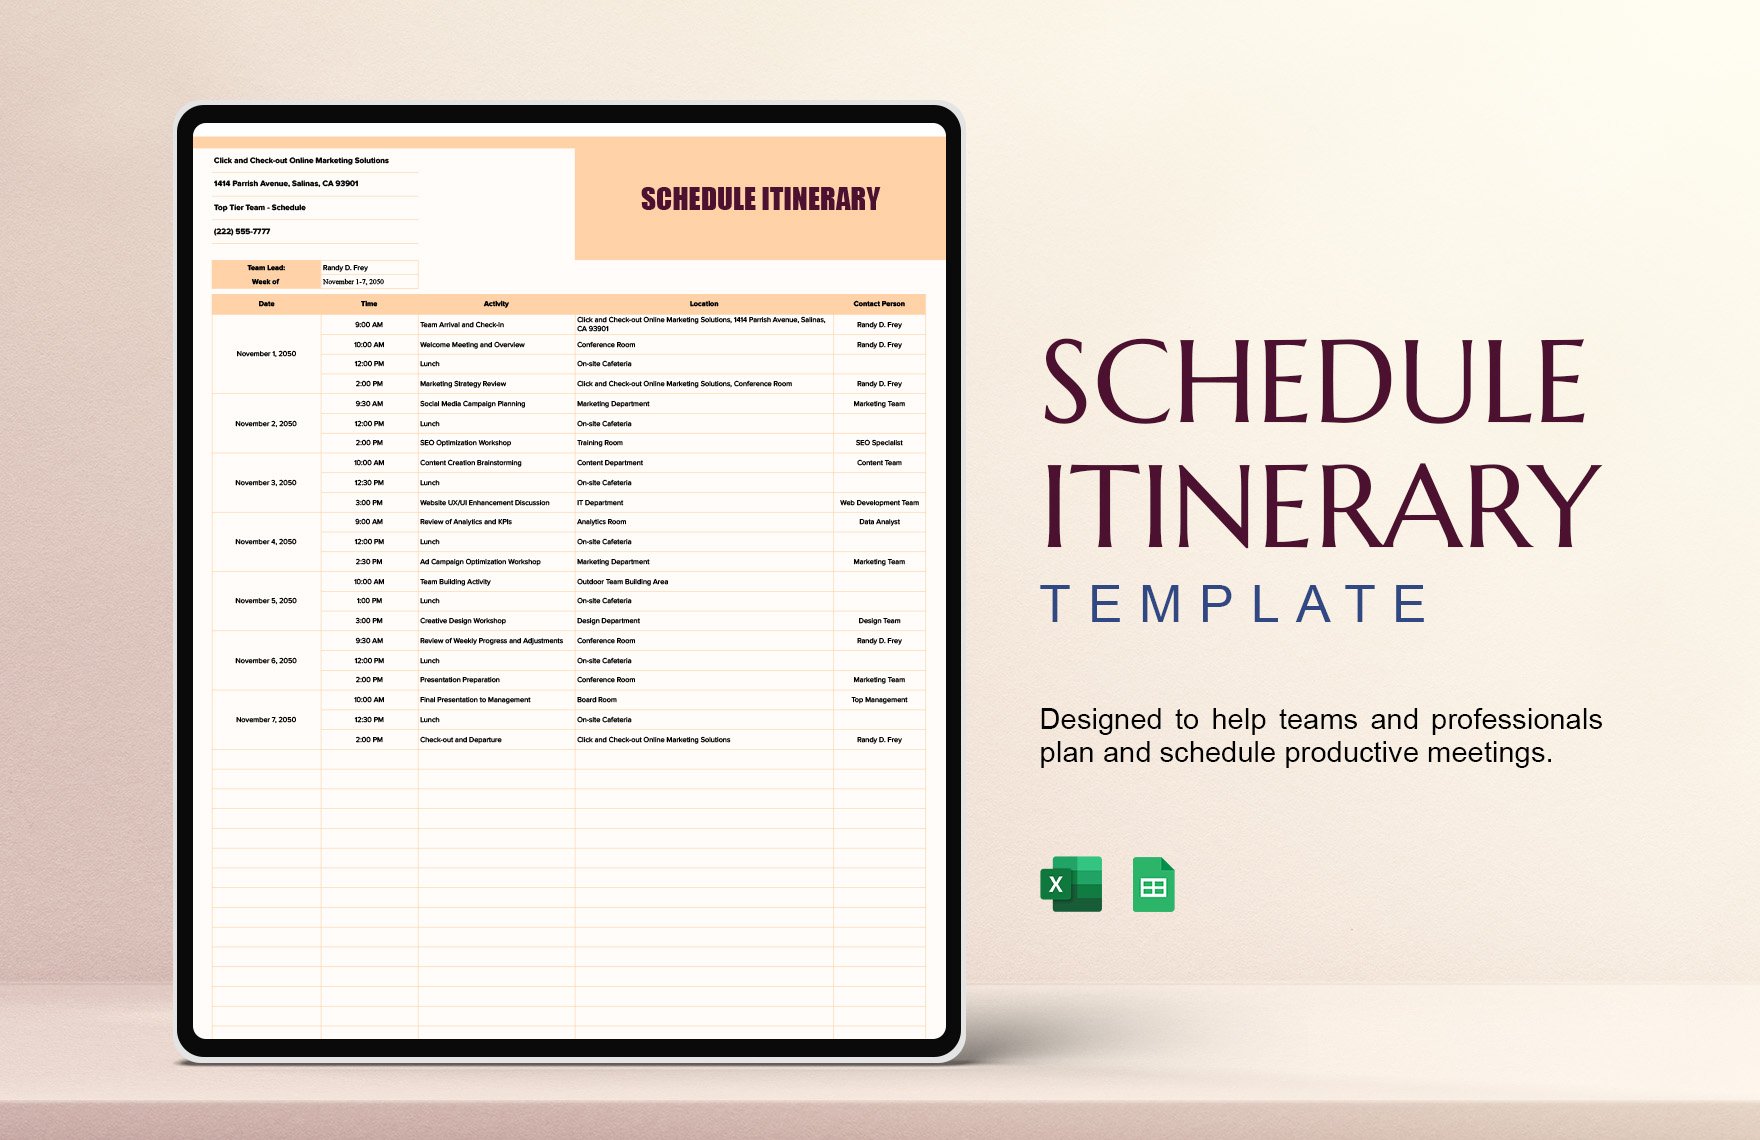 Schedule Itinerary Template